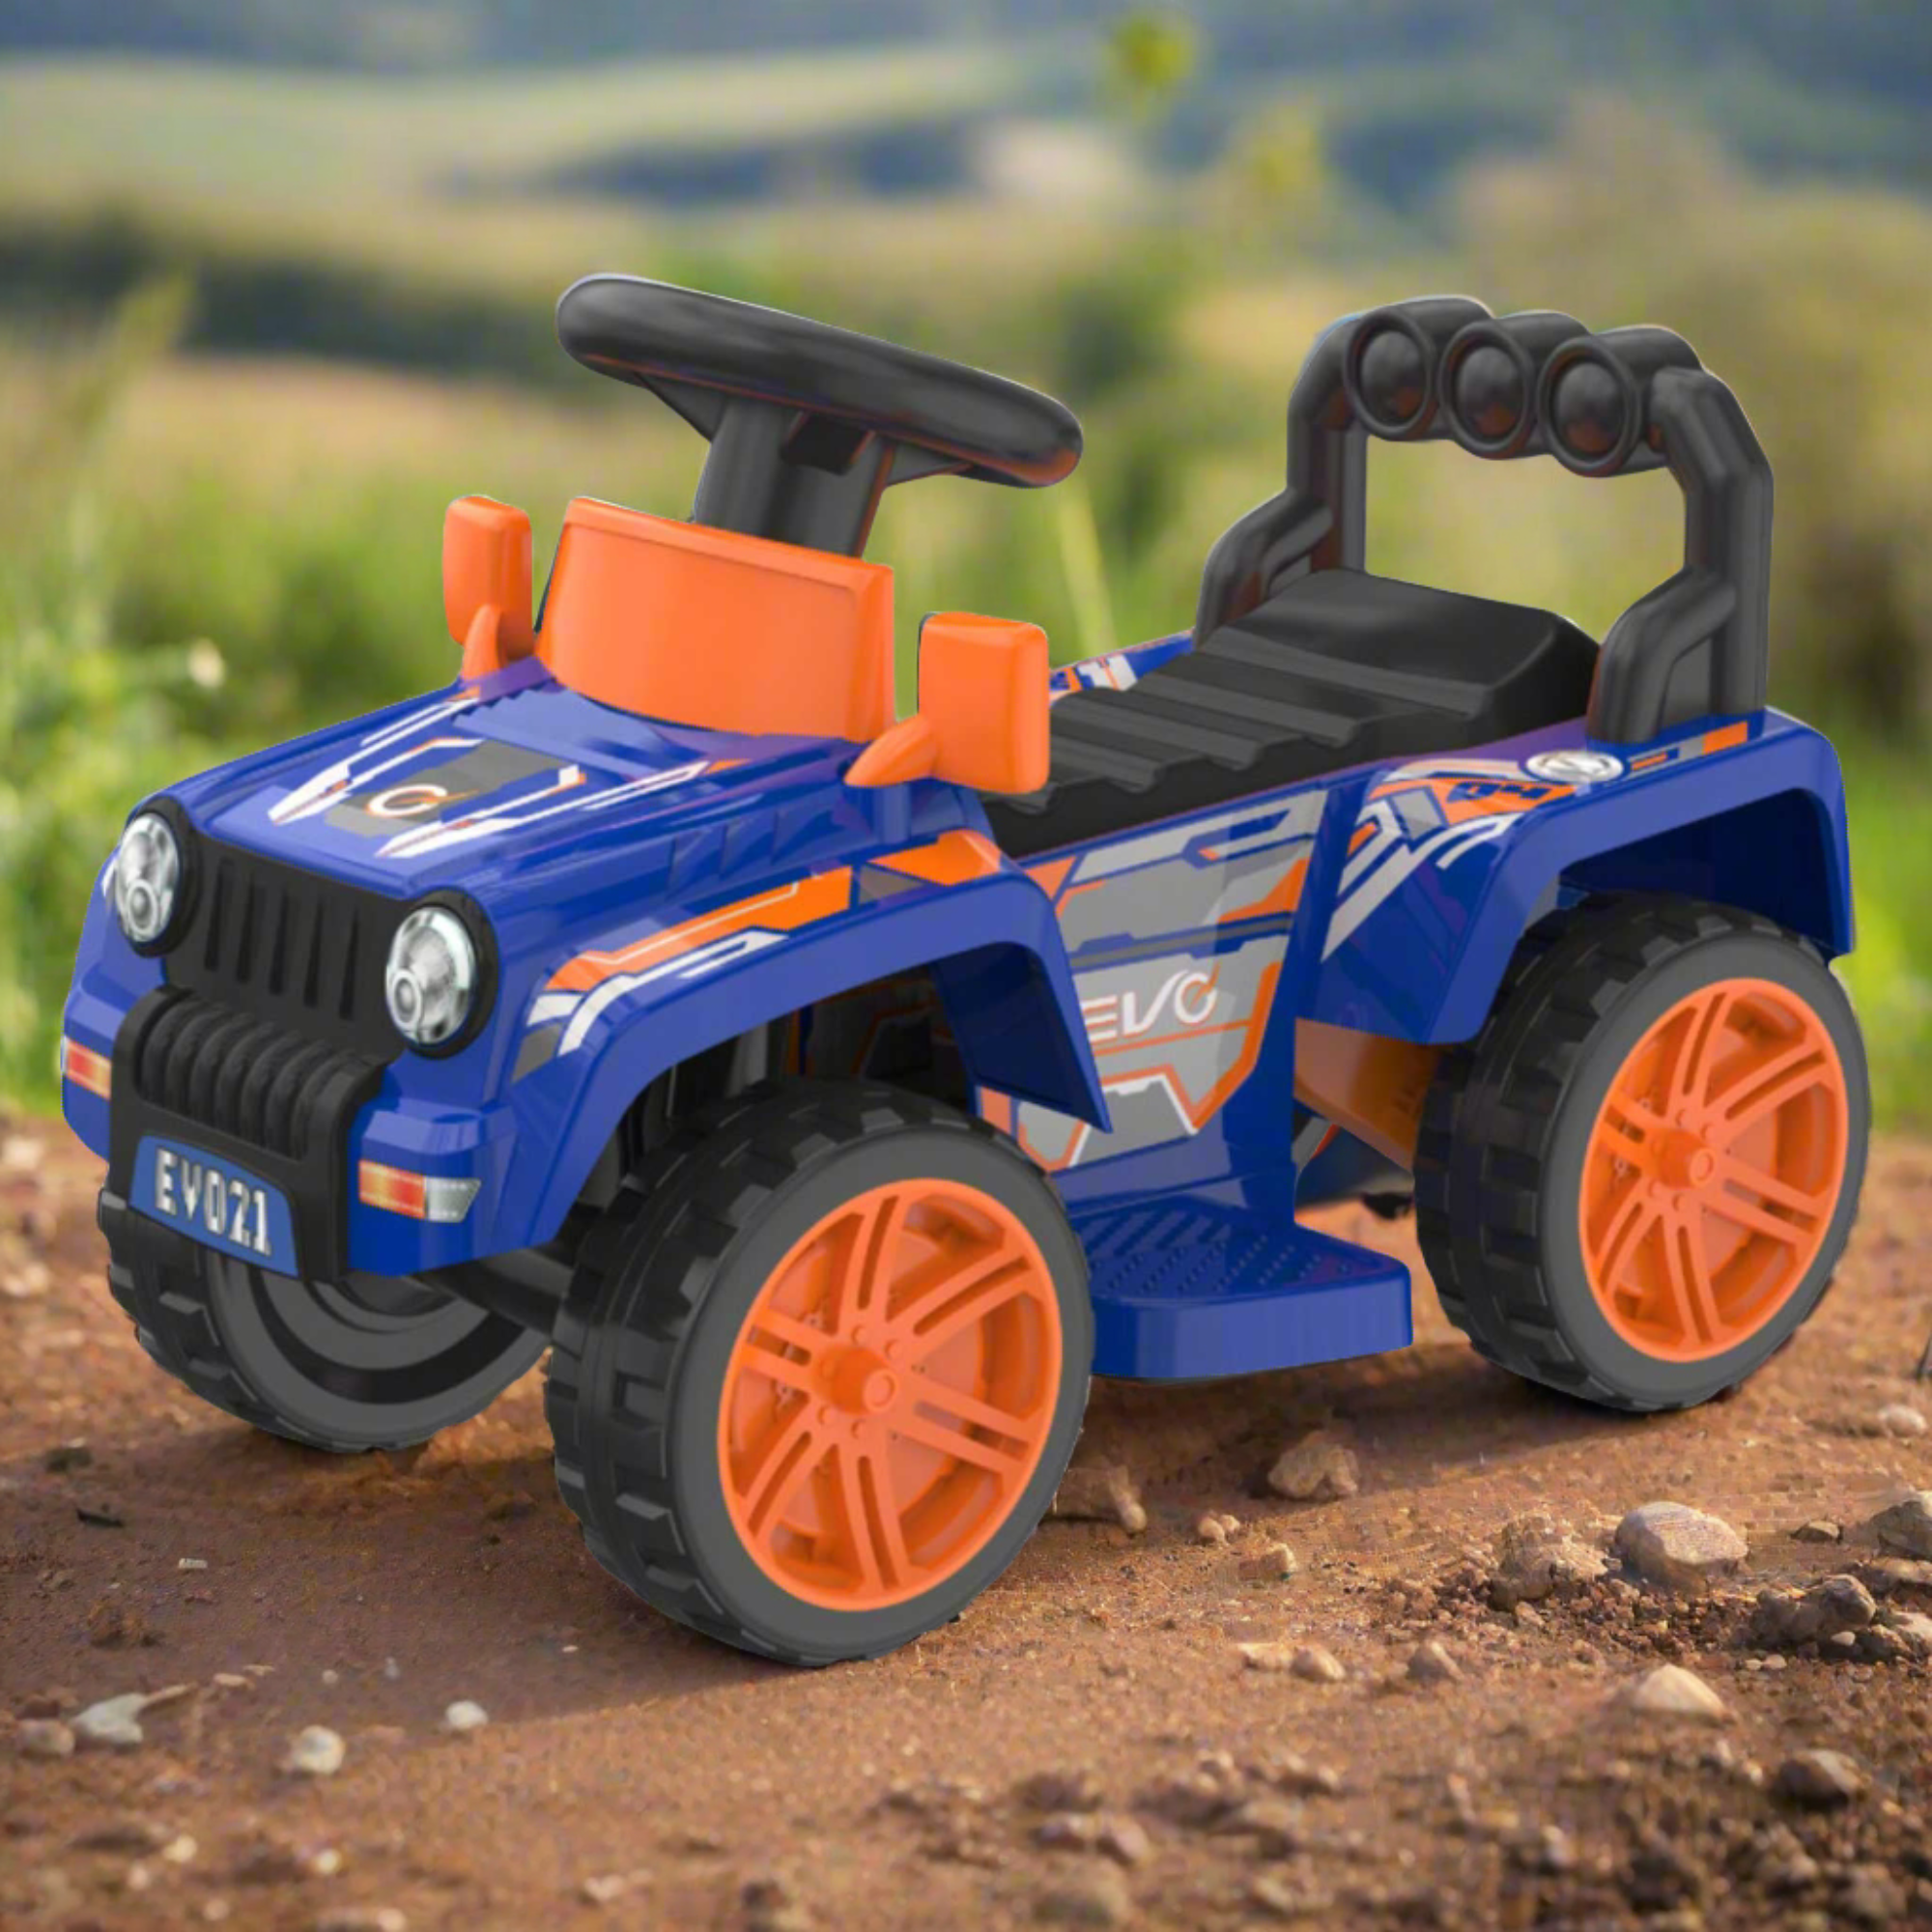 Blue EVO Zoom 4x4 Ride-On Truck for kids ages 3 and up, featuring realistic design, durable construction, and all-terrain wheels for outdoor adventures.